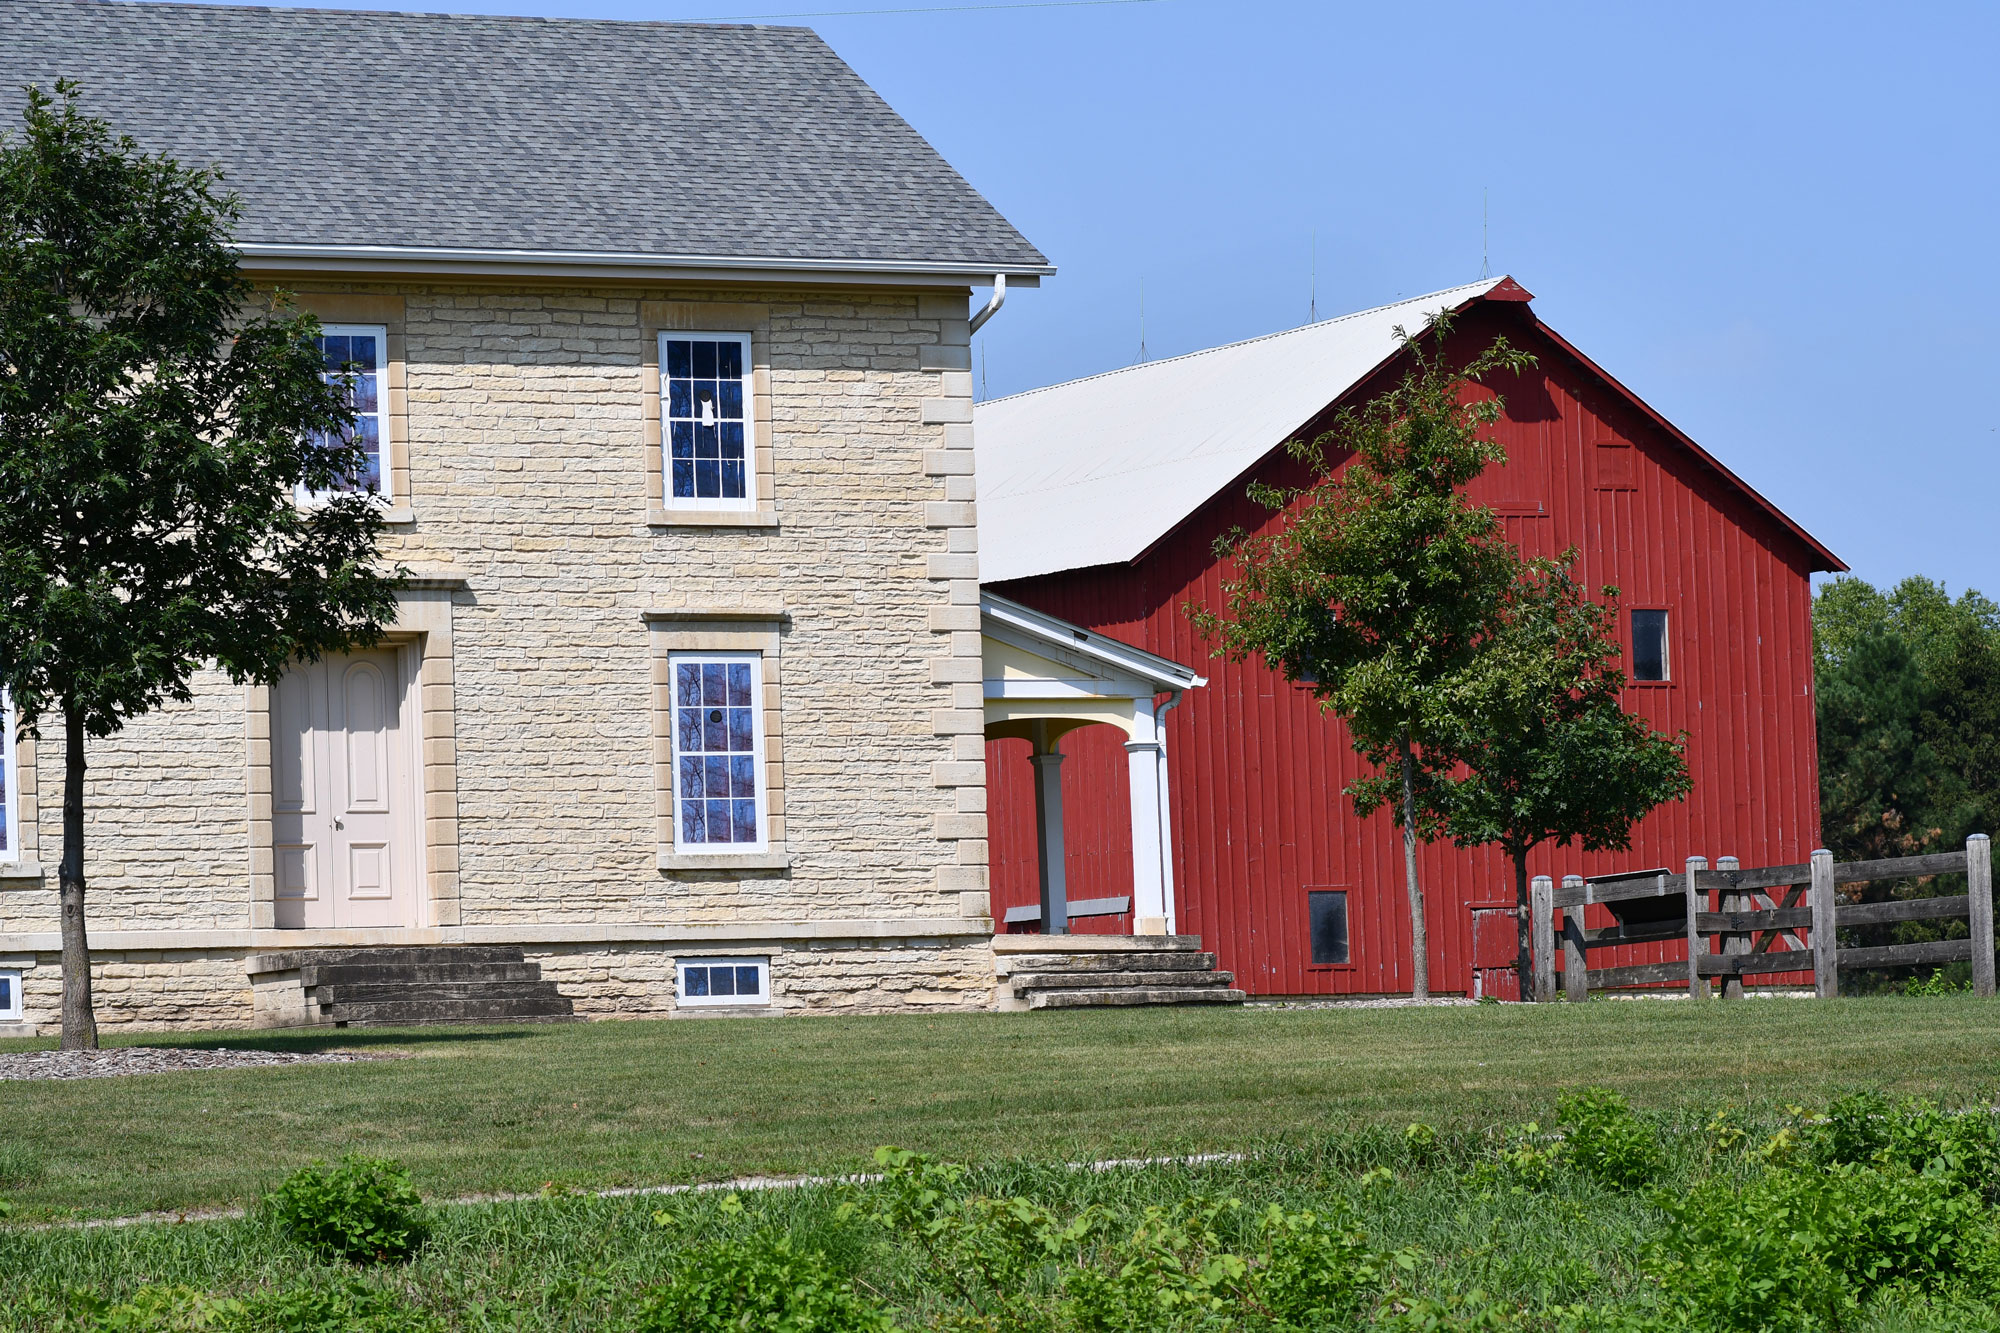 A view of a limestone house and red barn.